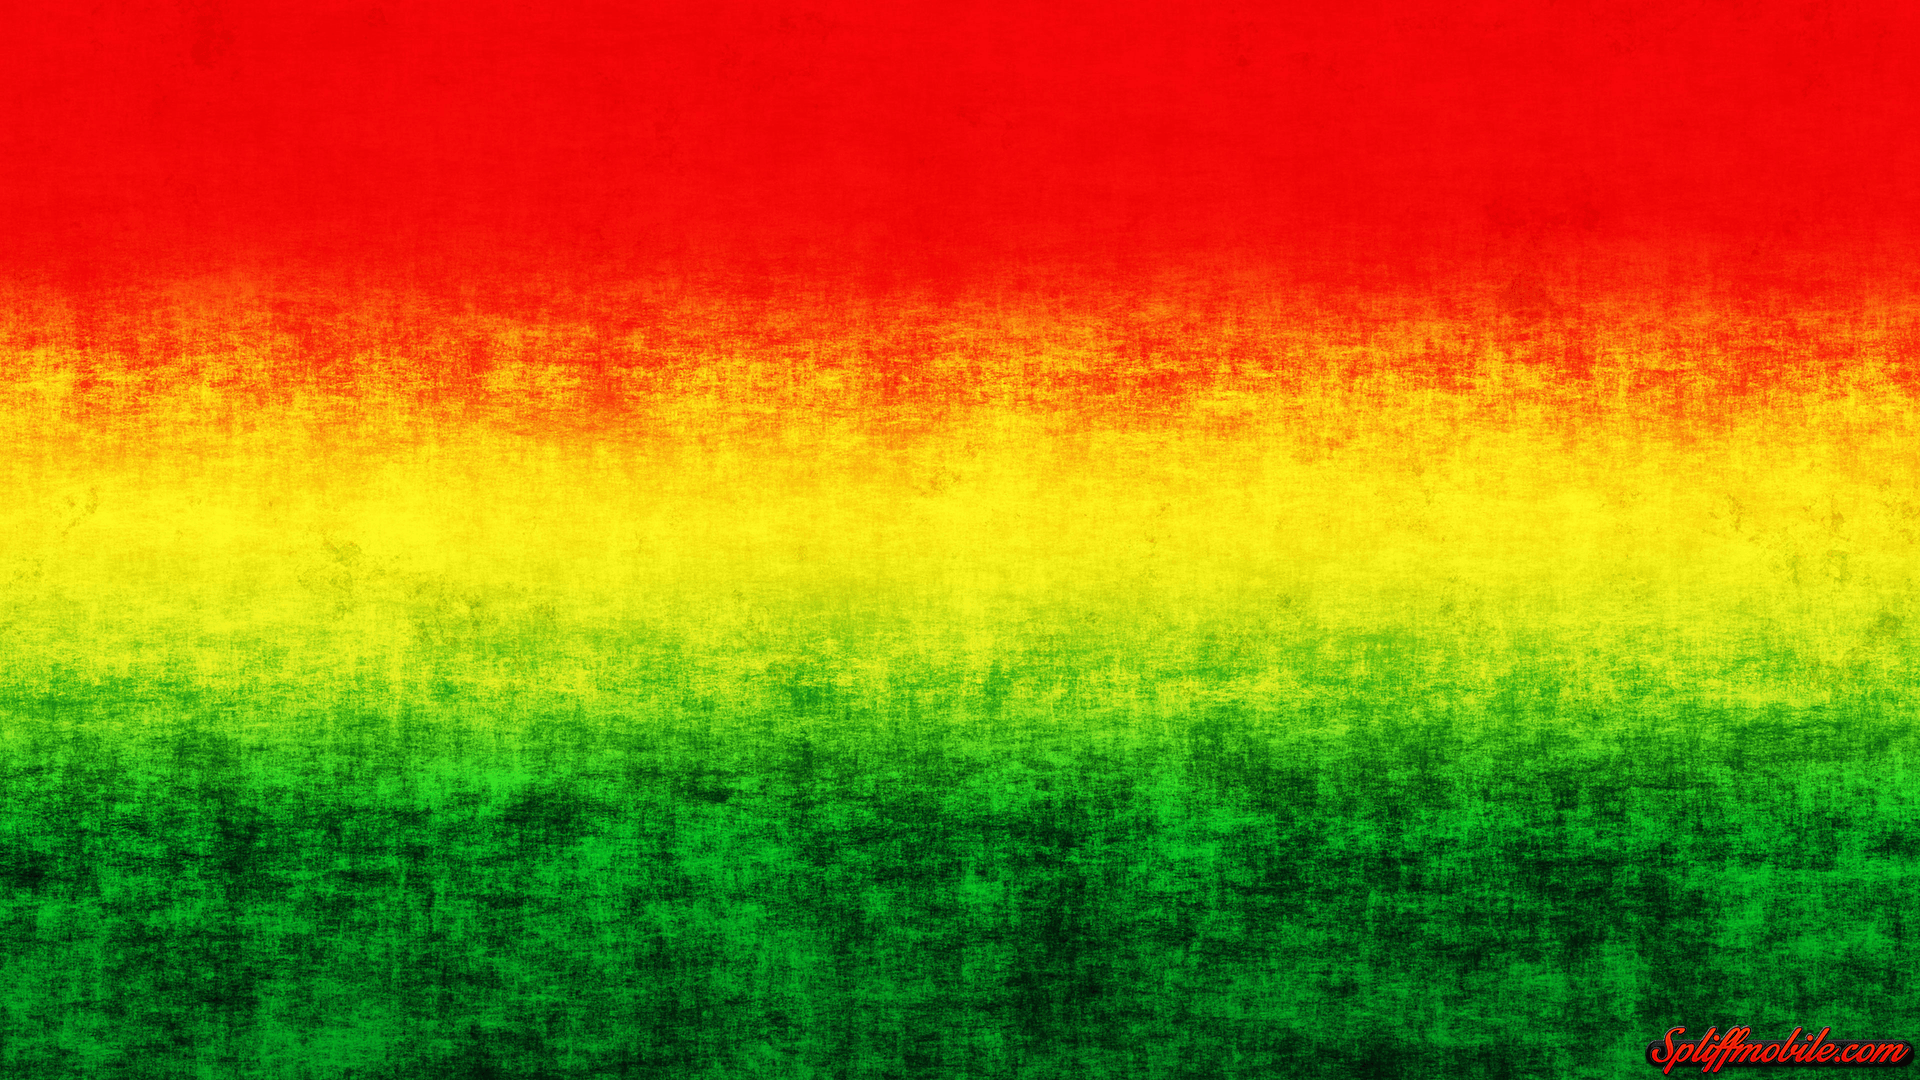 HD Wallpaper Rasta Picture Free Download Ideas for the House